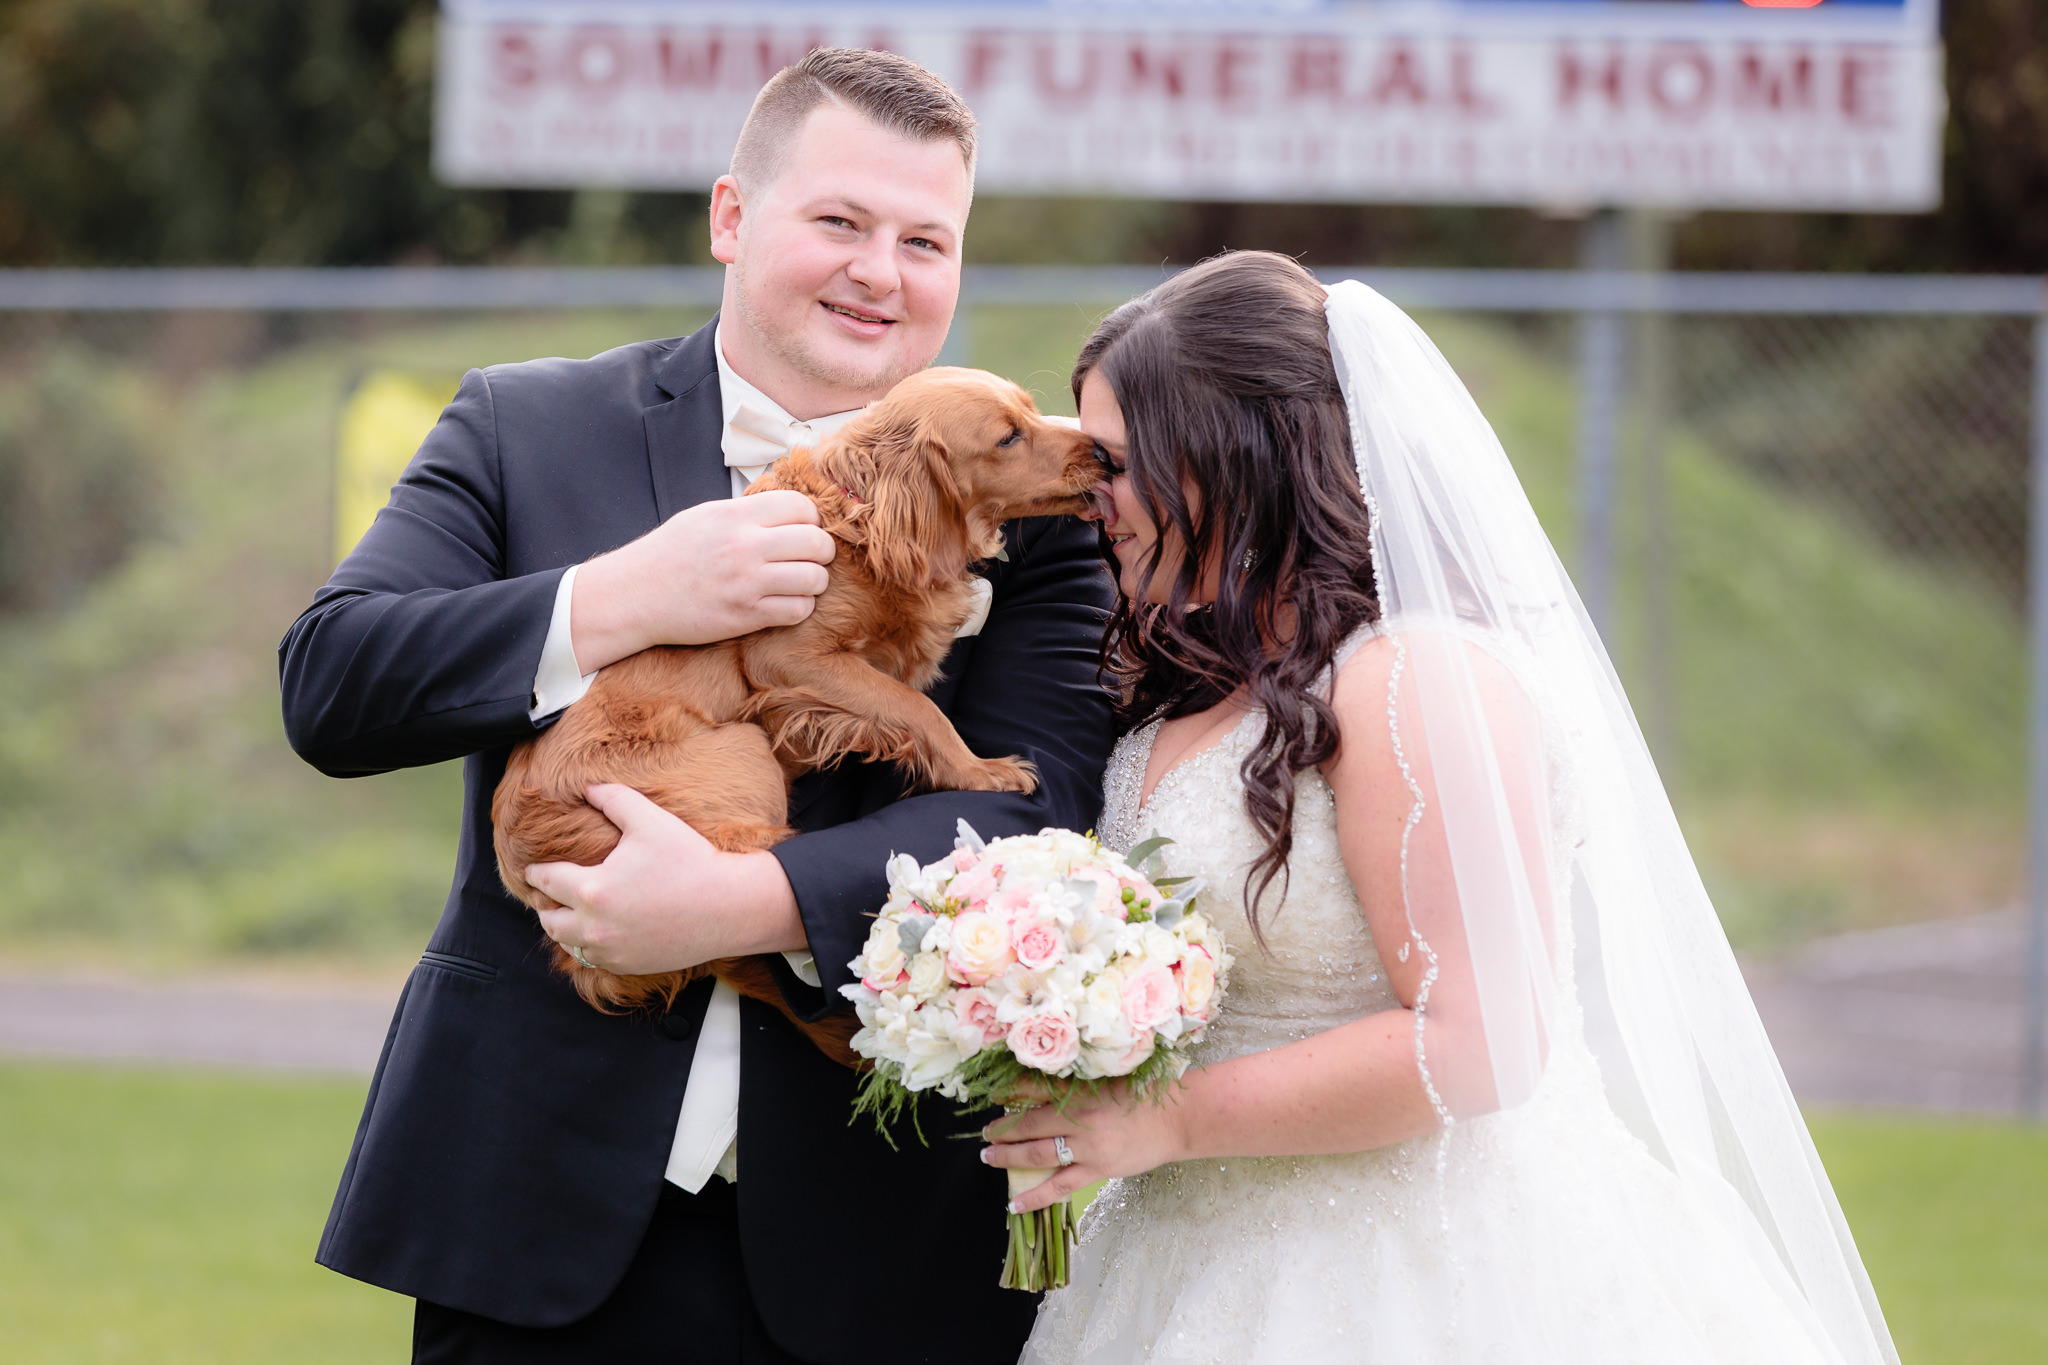 Bride's dog licks her face during portraits at the Robinson Township Girls Softball field